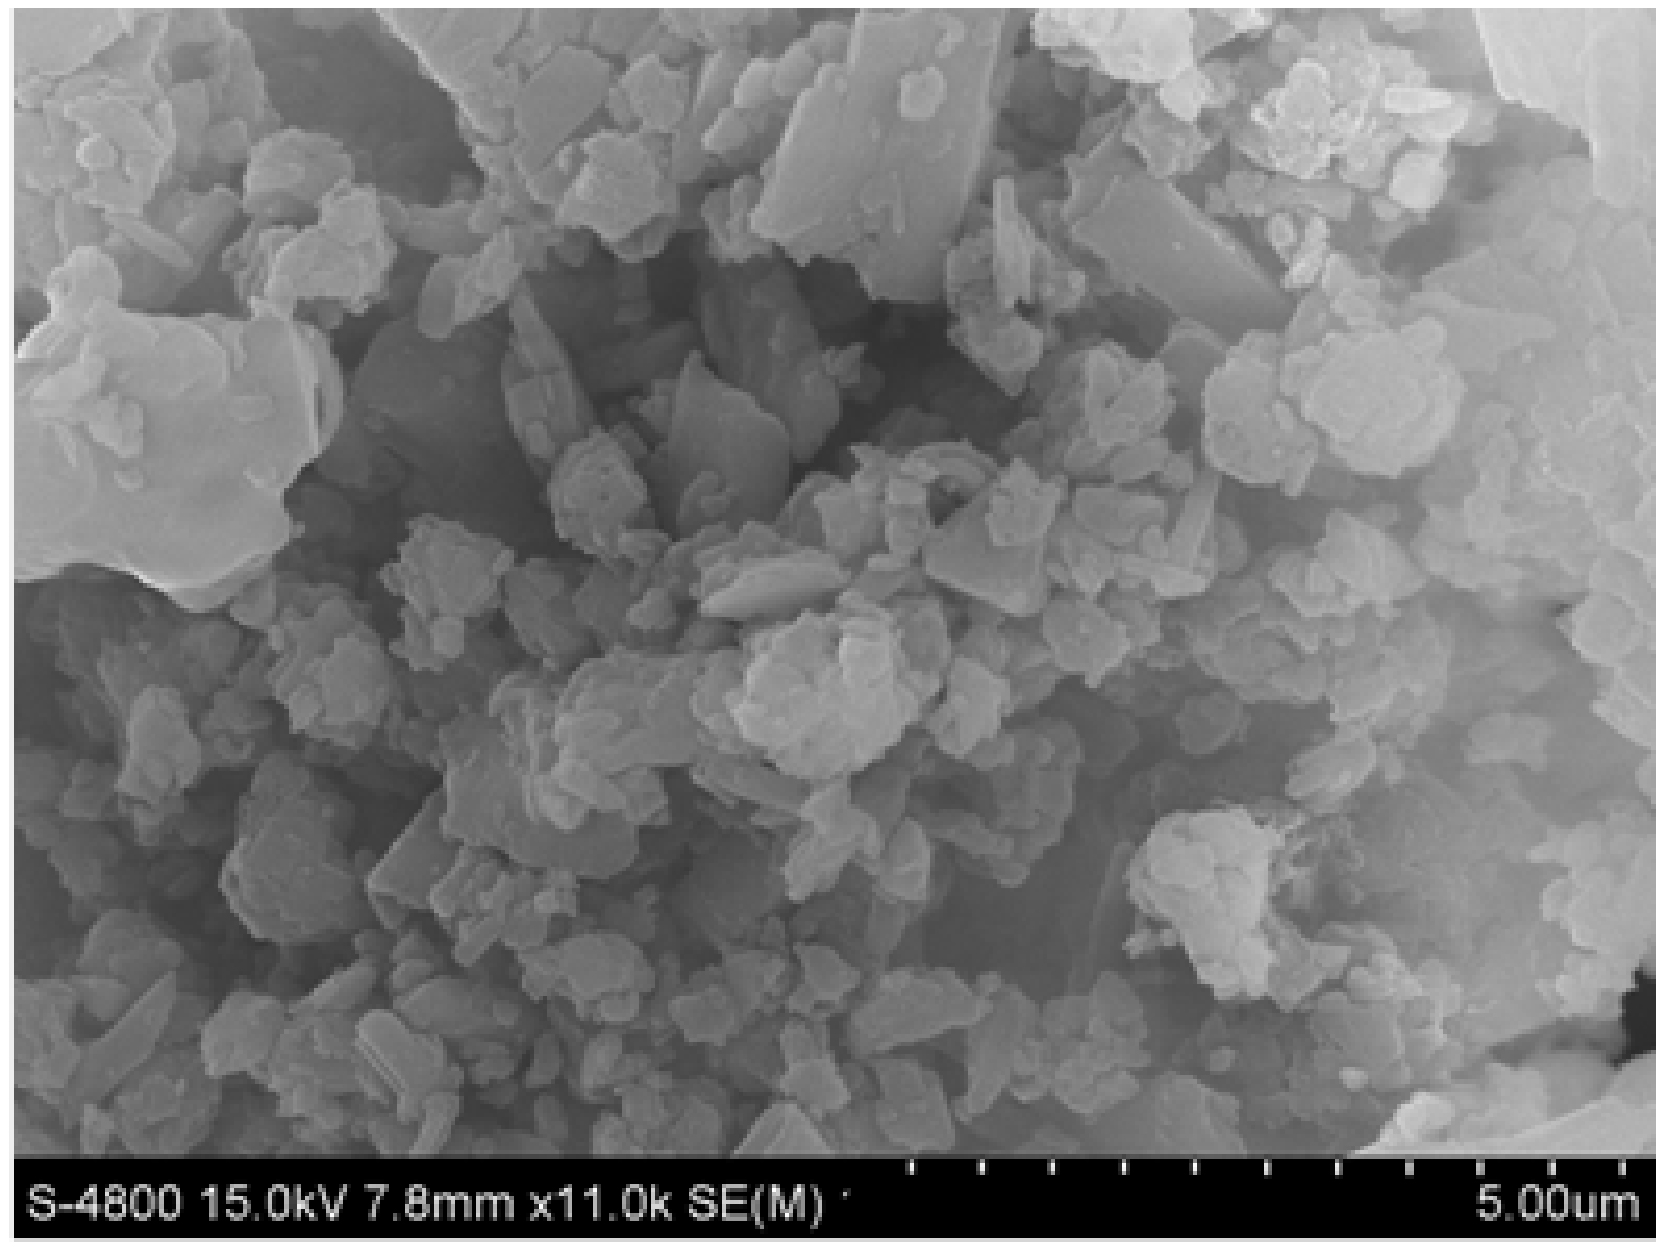 Figure 2. SEM micrograph of PIn sample with stoichiometric ratio of indole and FeCl3 as (40:60) Wt. %.